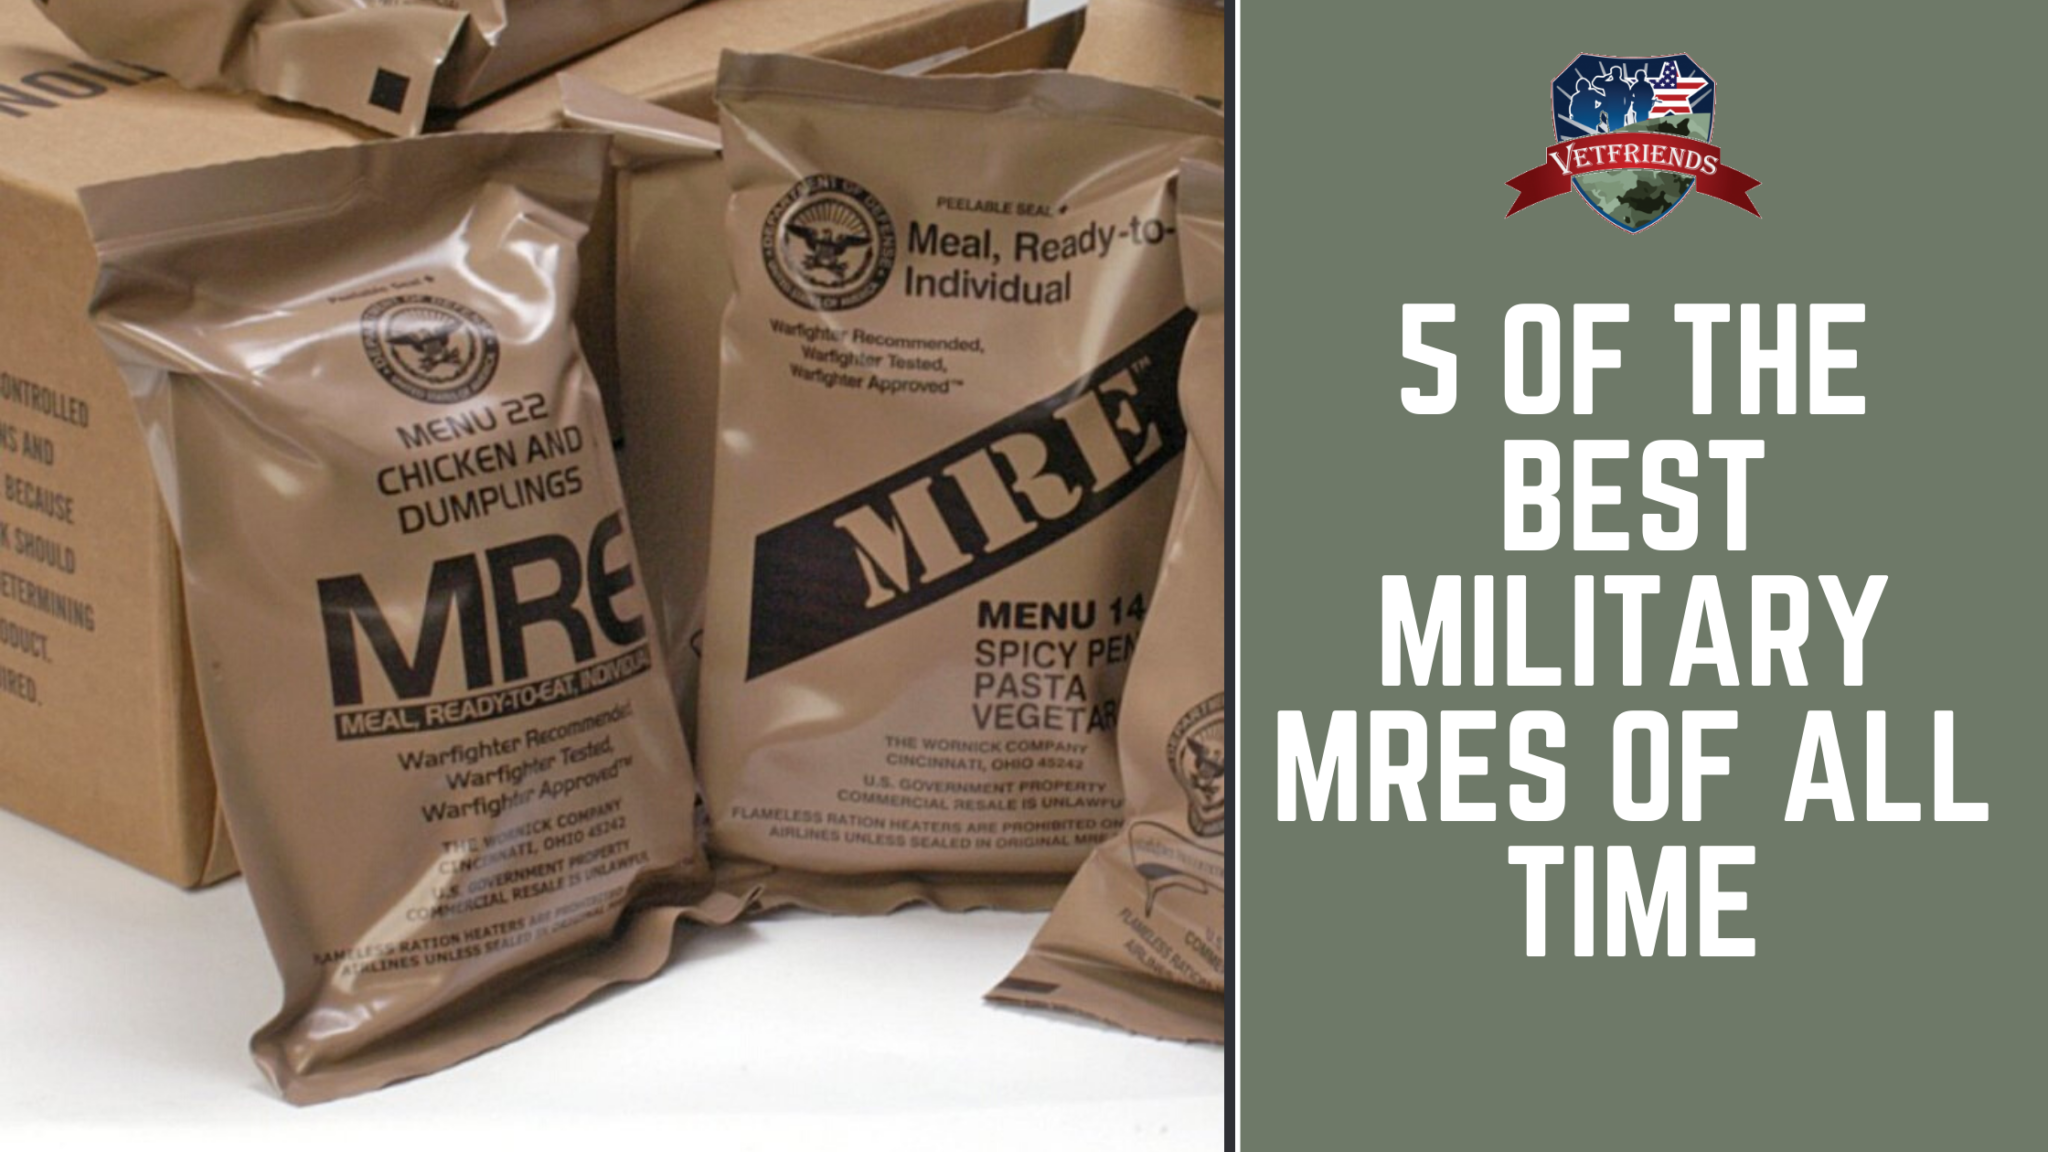 best mre meals - amazon mre meals - 5 of the Best Military MREs of All Time - VetFriends